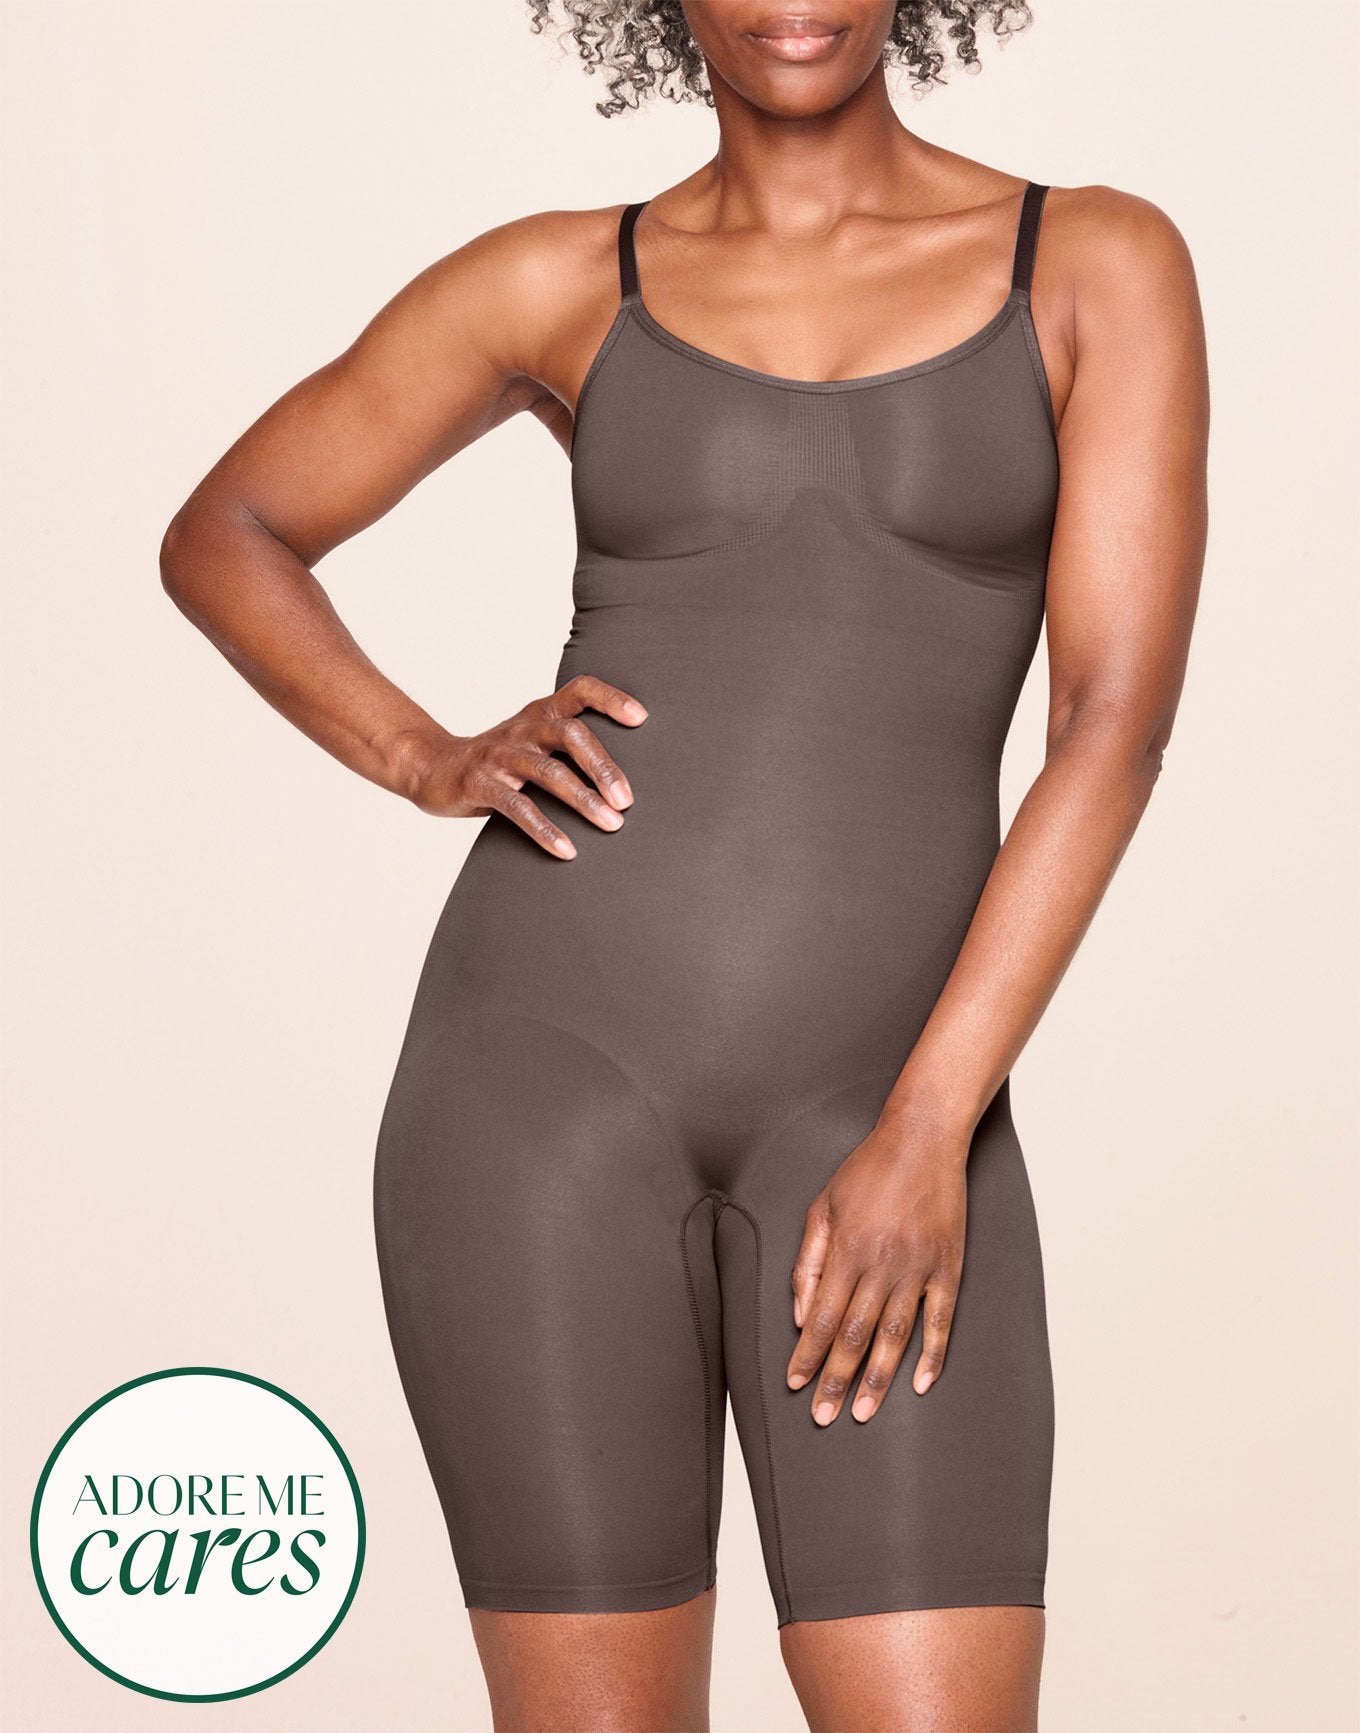 nueskin Analise High-Compression Bodysuit in color Deep Taupe and shape bodysuit